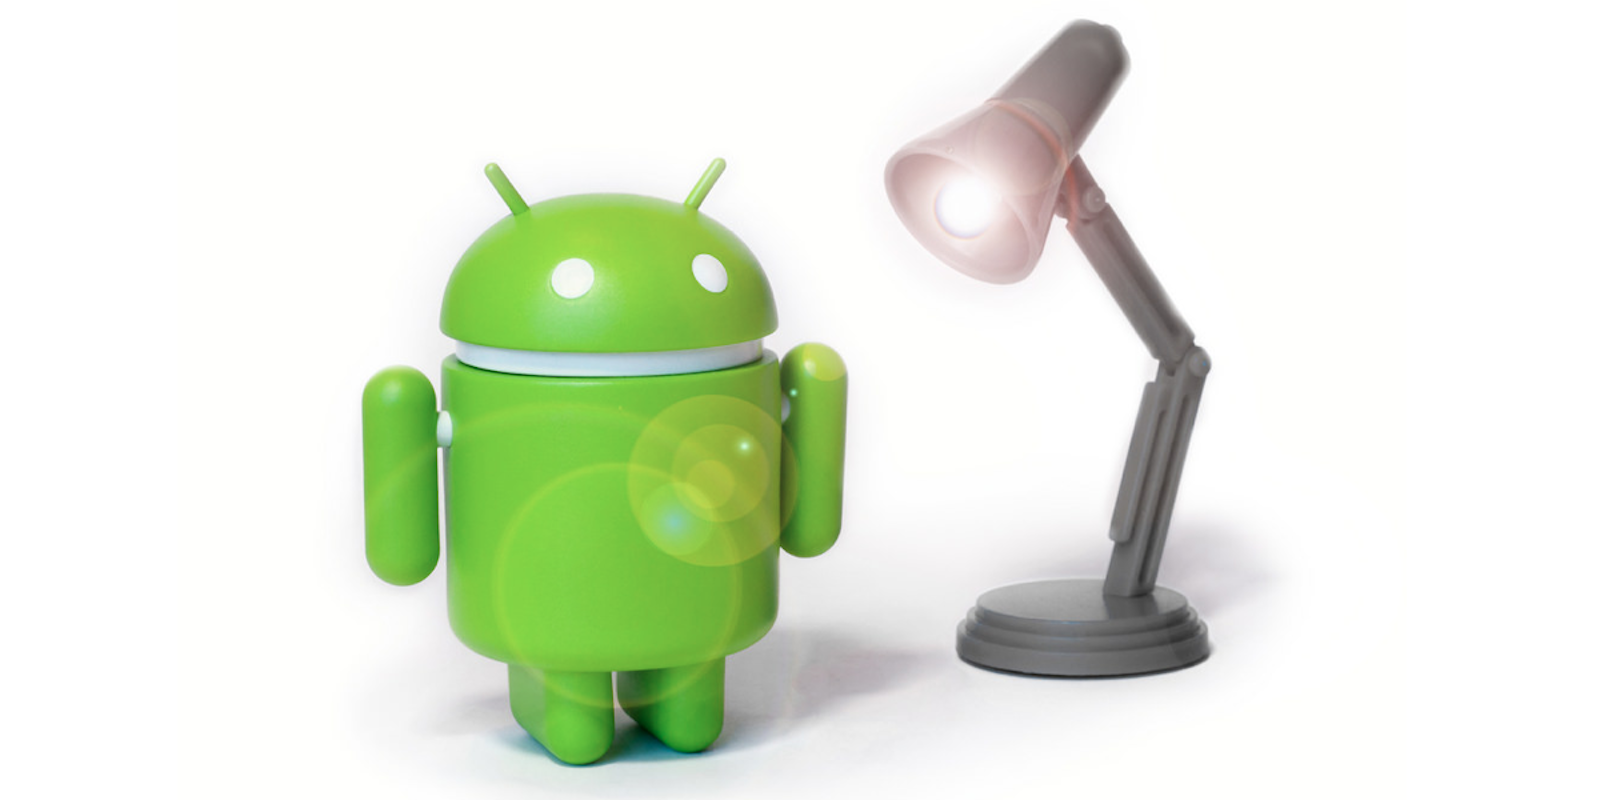 Android figurine next to lamp